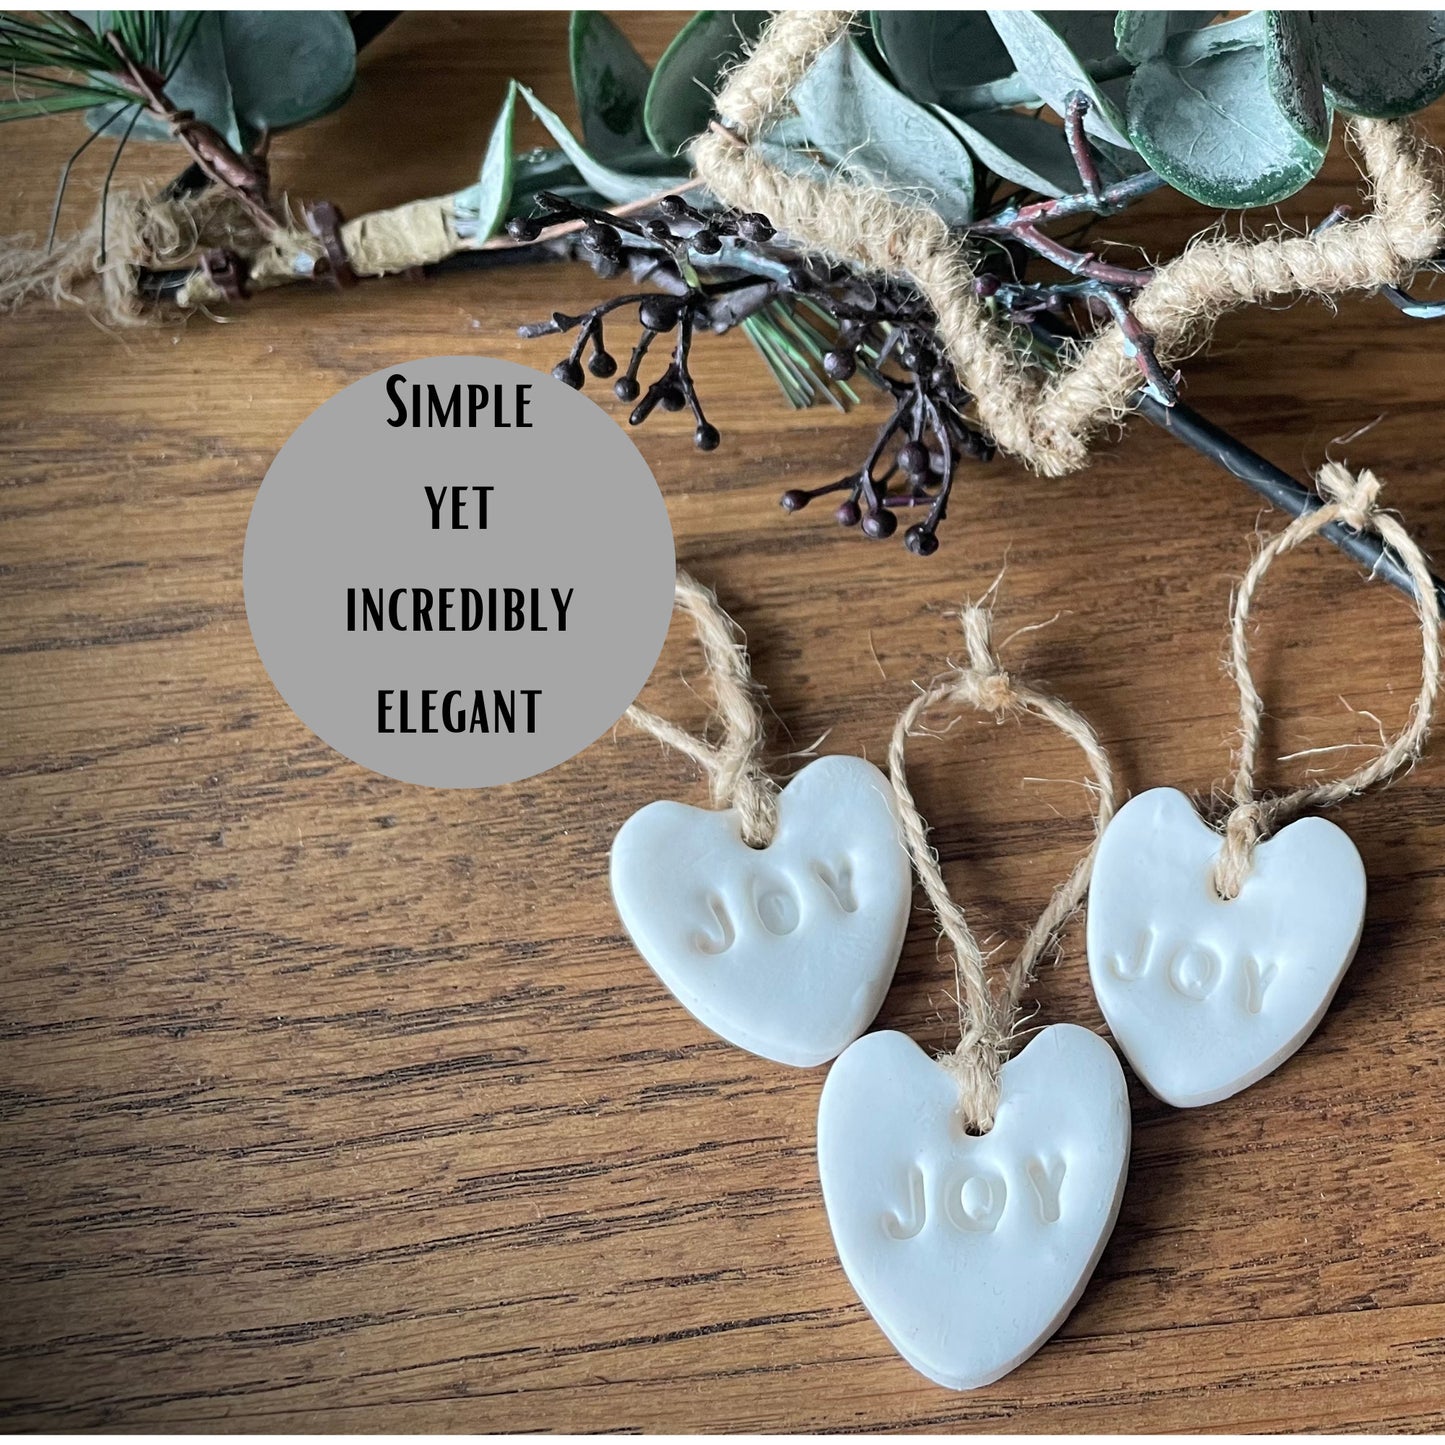 White Ceramic Hanging Clay Hearts, Set of 3 Hand Stamped Joy Mini Christmas Tree Decorations, Scandi Style Present Gift Tags or Napkin Rings